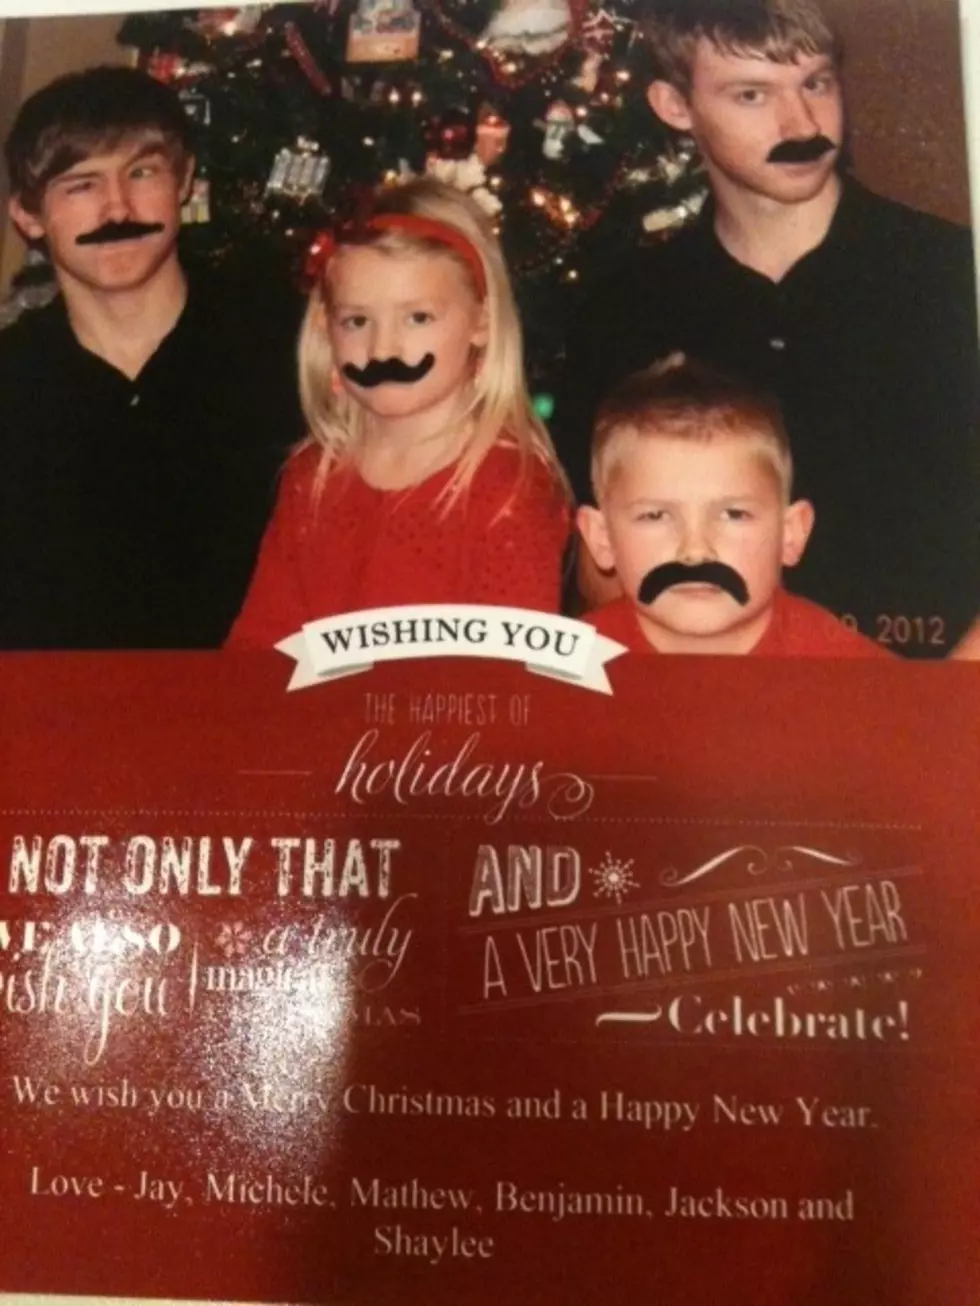 What Do You Think Of Our Family Christmas Card?